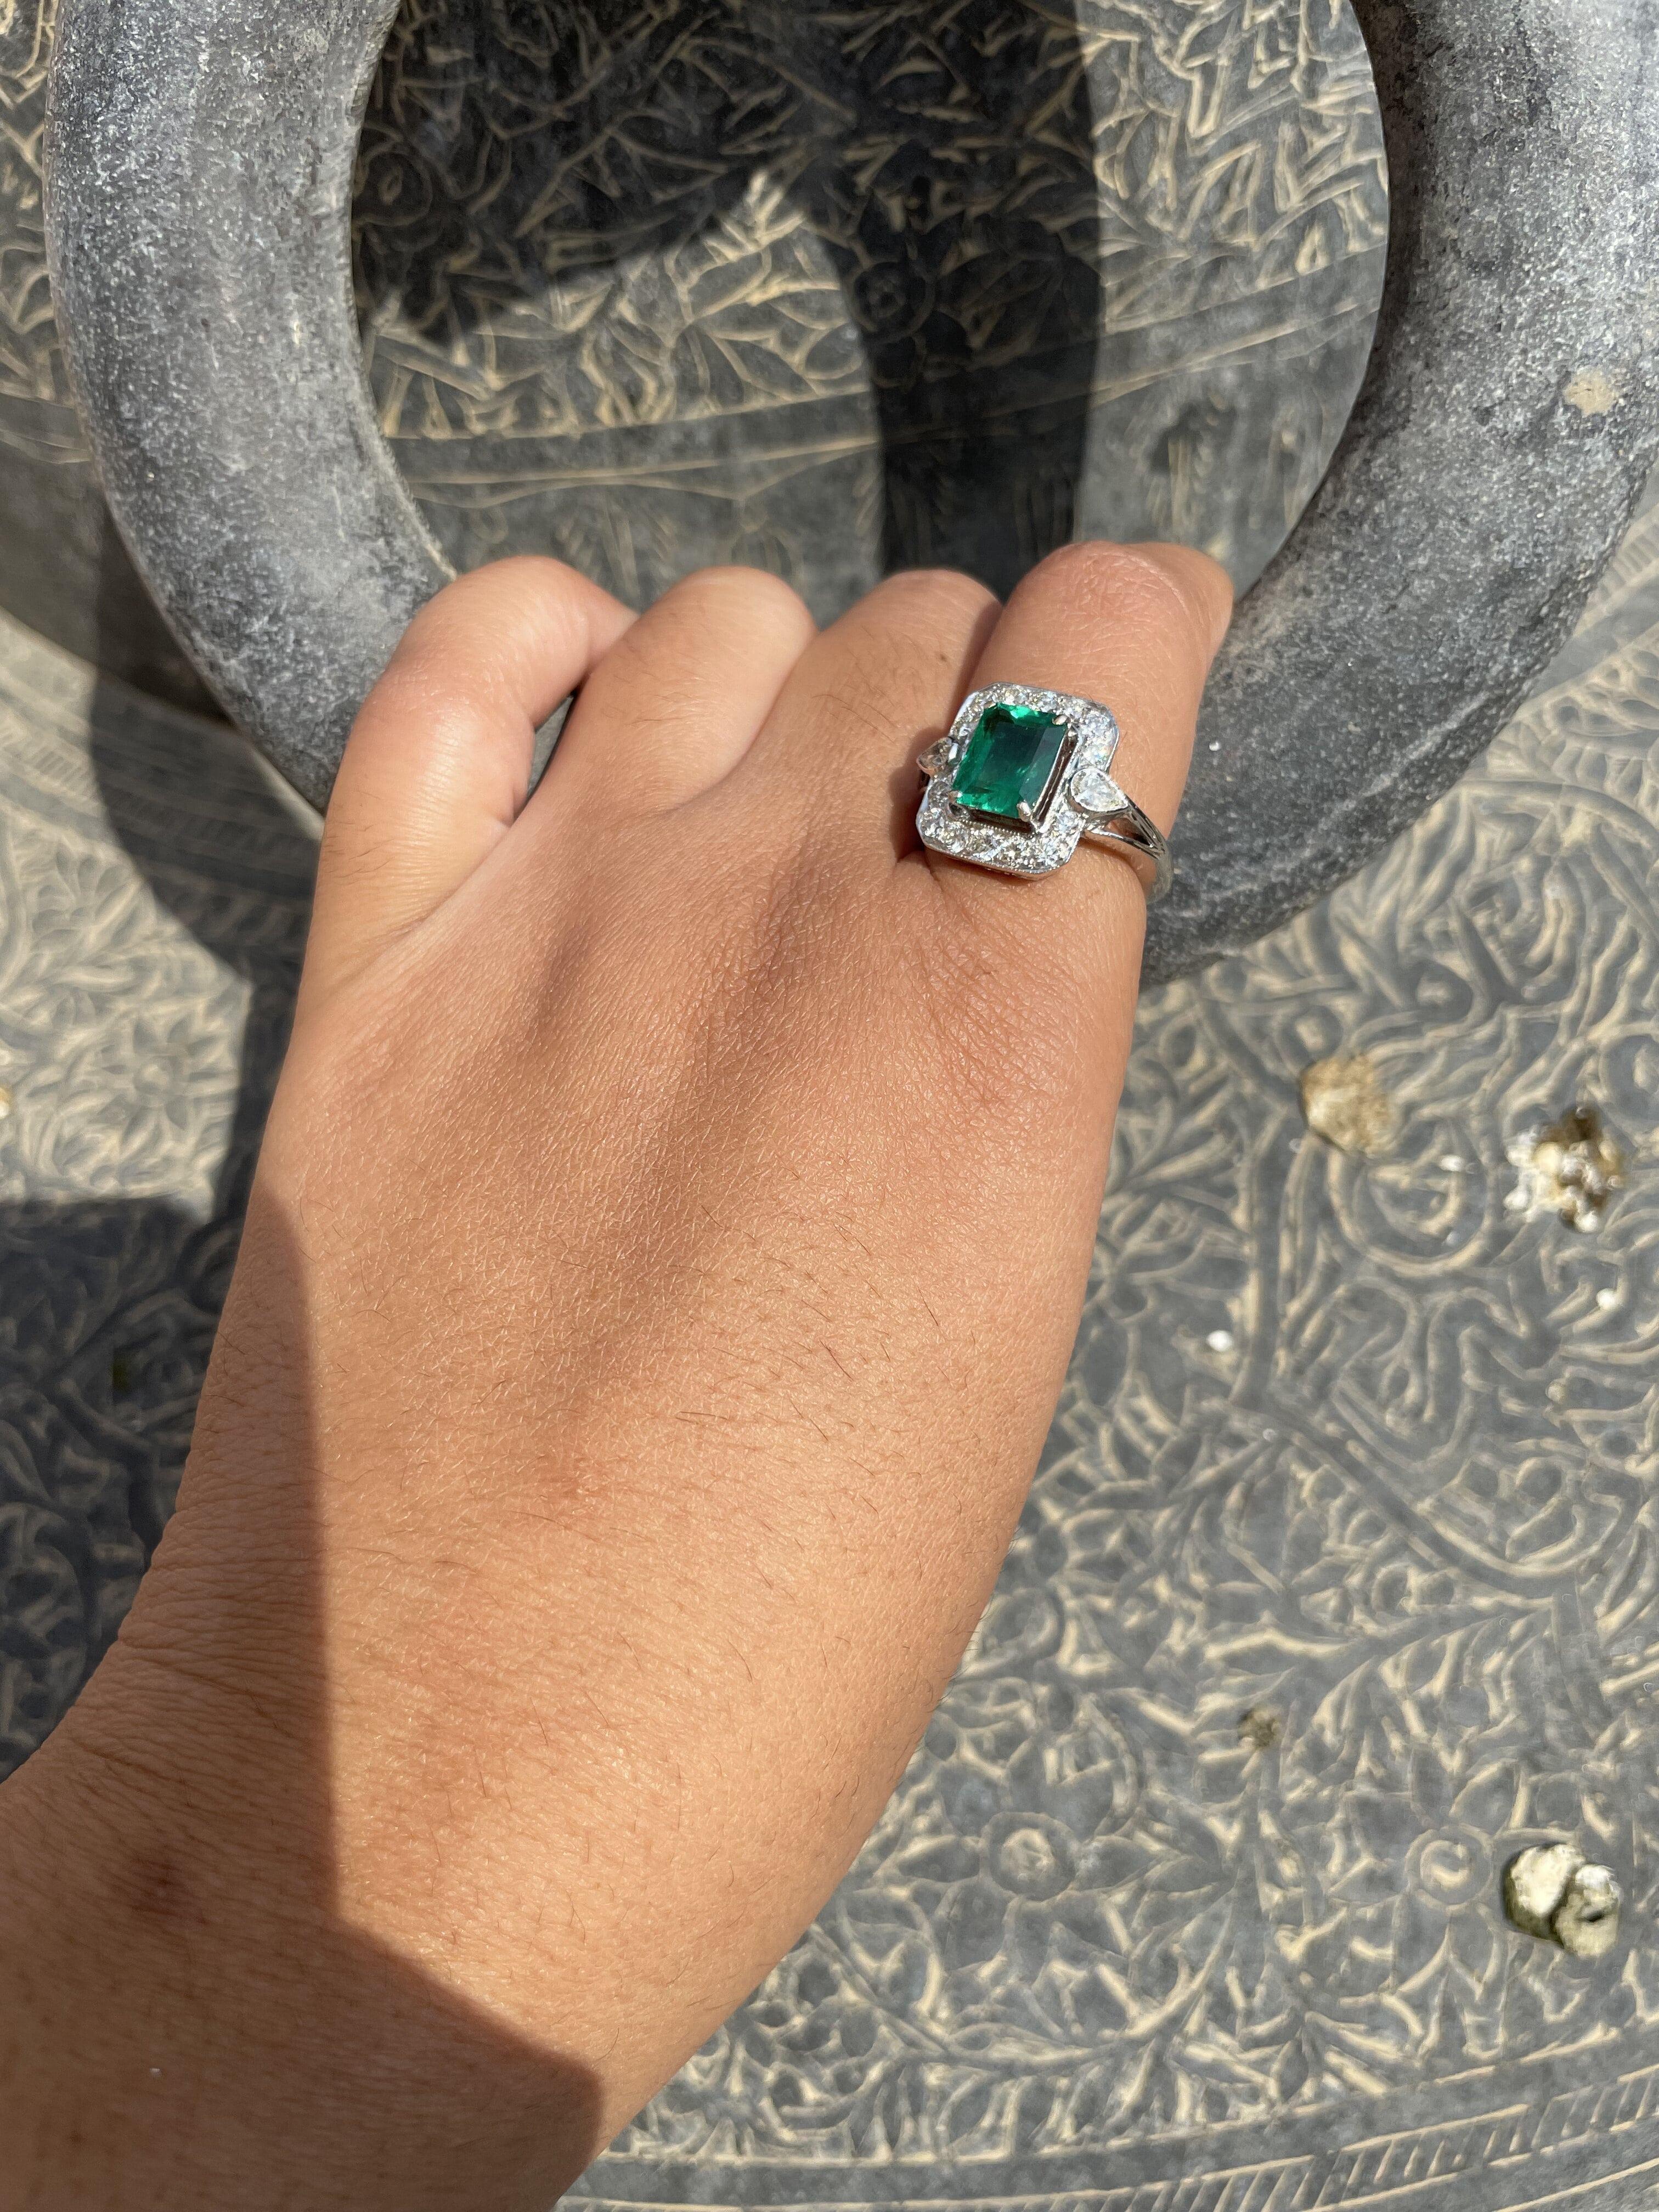 For Sale:  Exquisite 18kt Solid White Gold Emerald And Diamond Ring 3